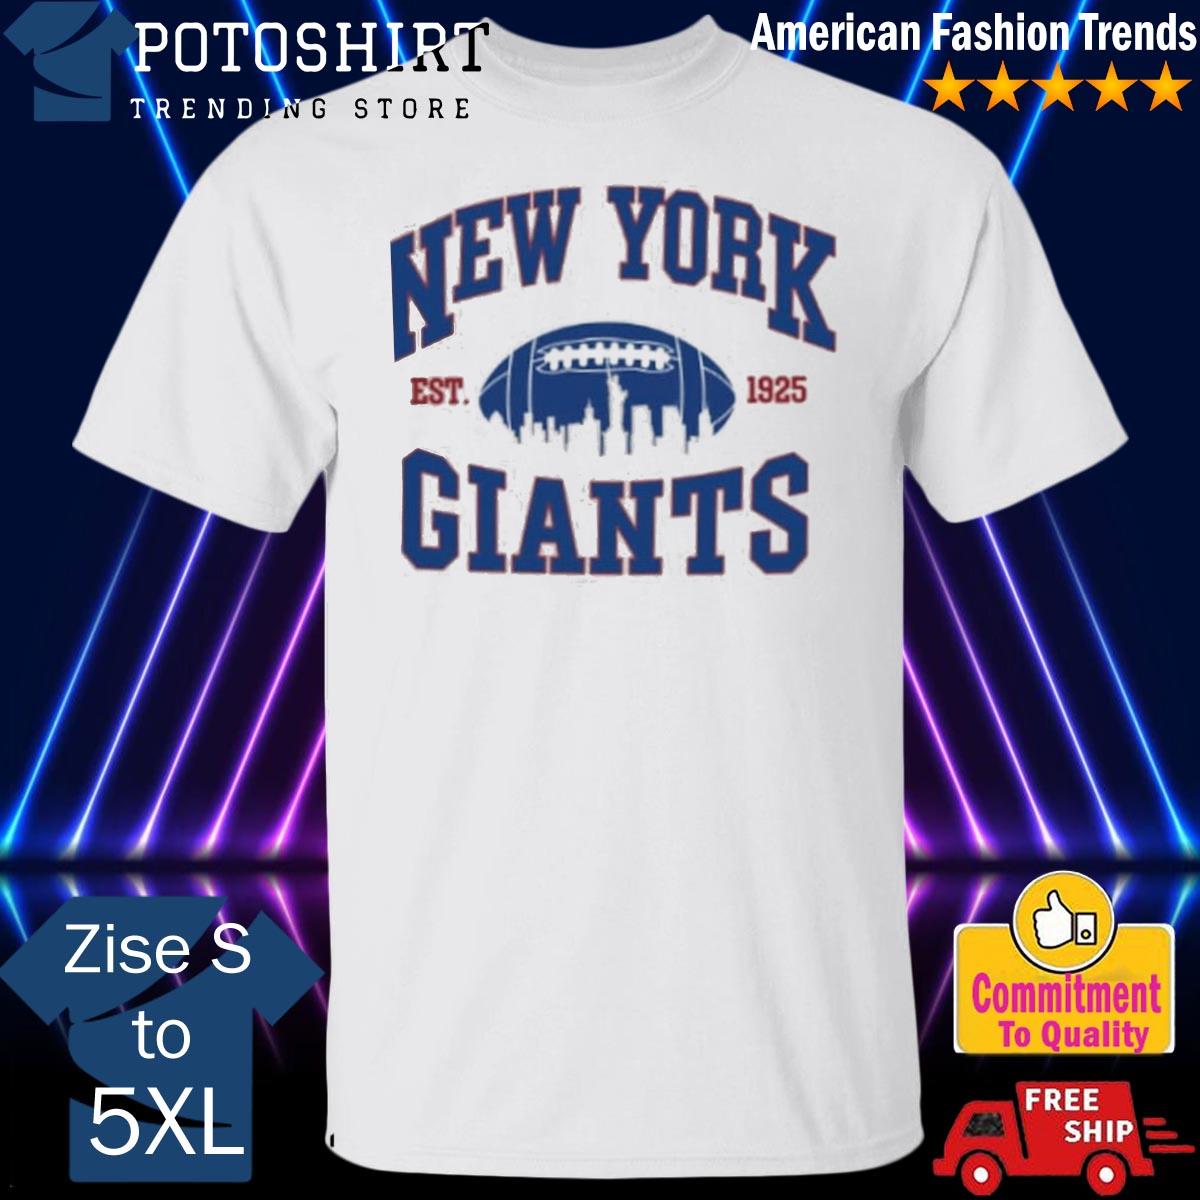 New York Giants Apparel, Giants Gear, NY Giants Merchandise at NFL Shop